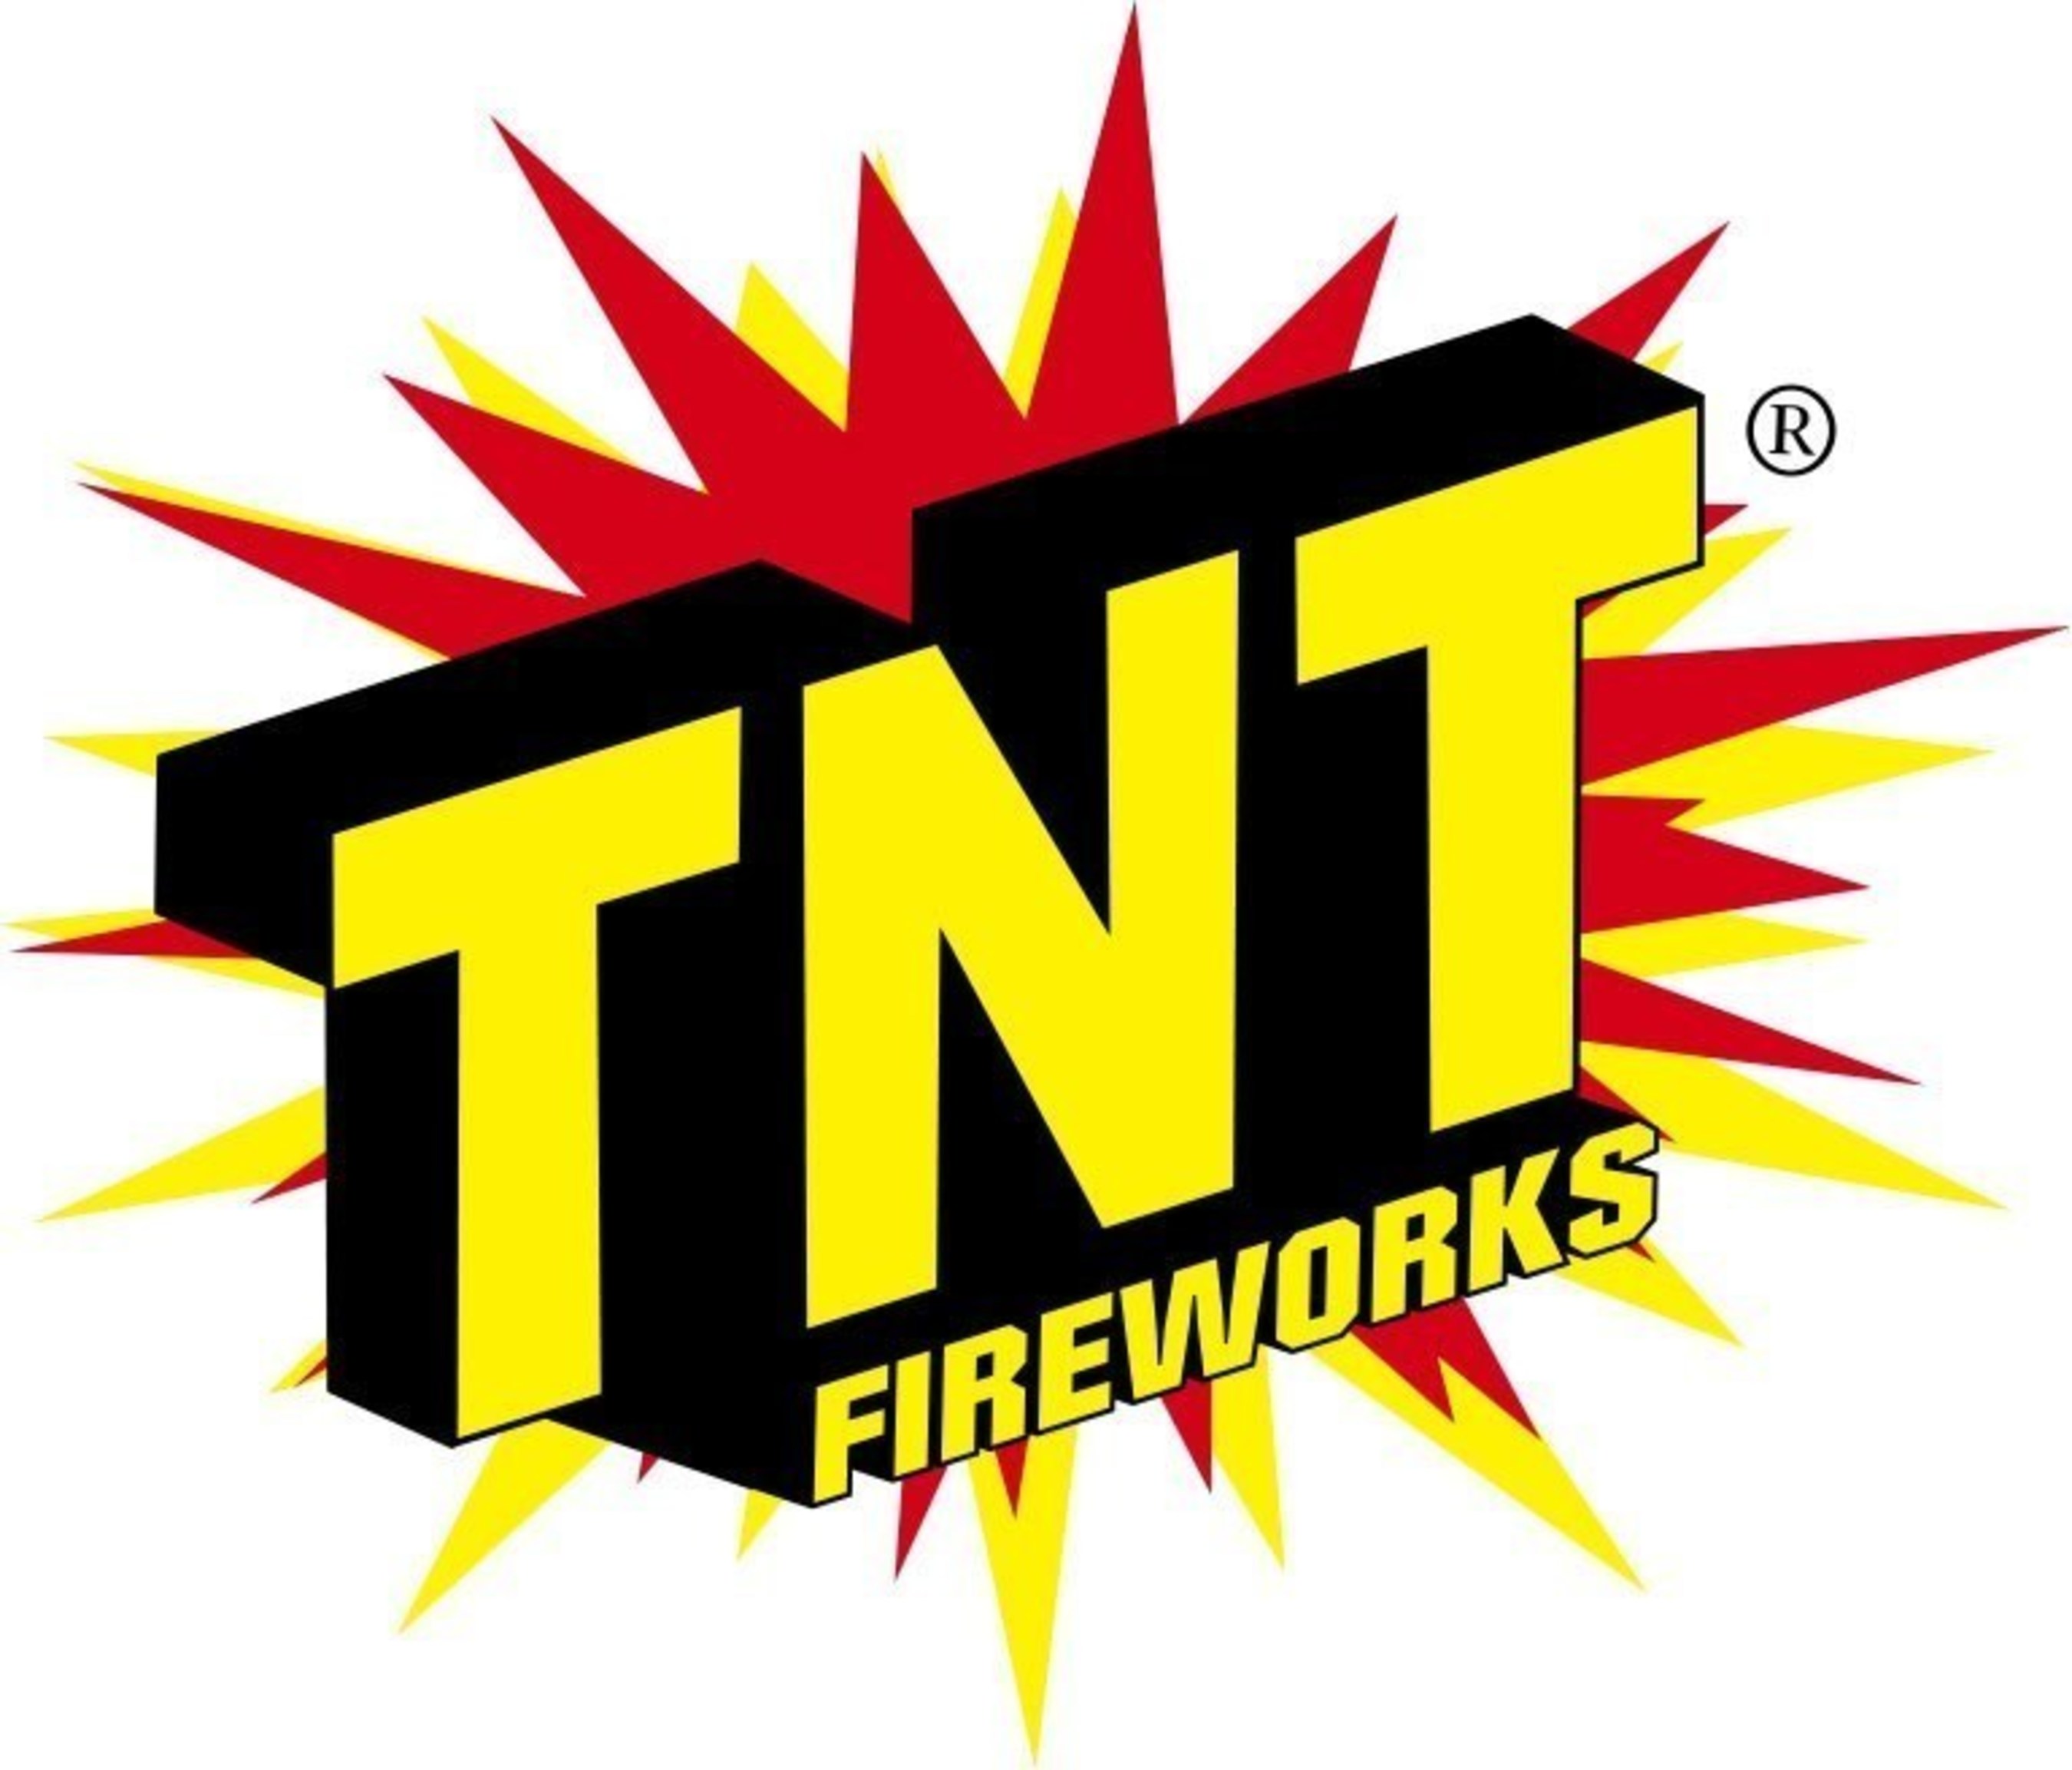 Georgia's New Fireworks Law Becomes Legal on Wednesday, TNT Fireworks Encourages Safety, Fun for the Fourth